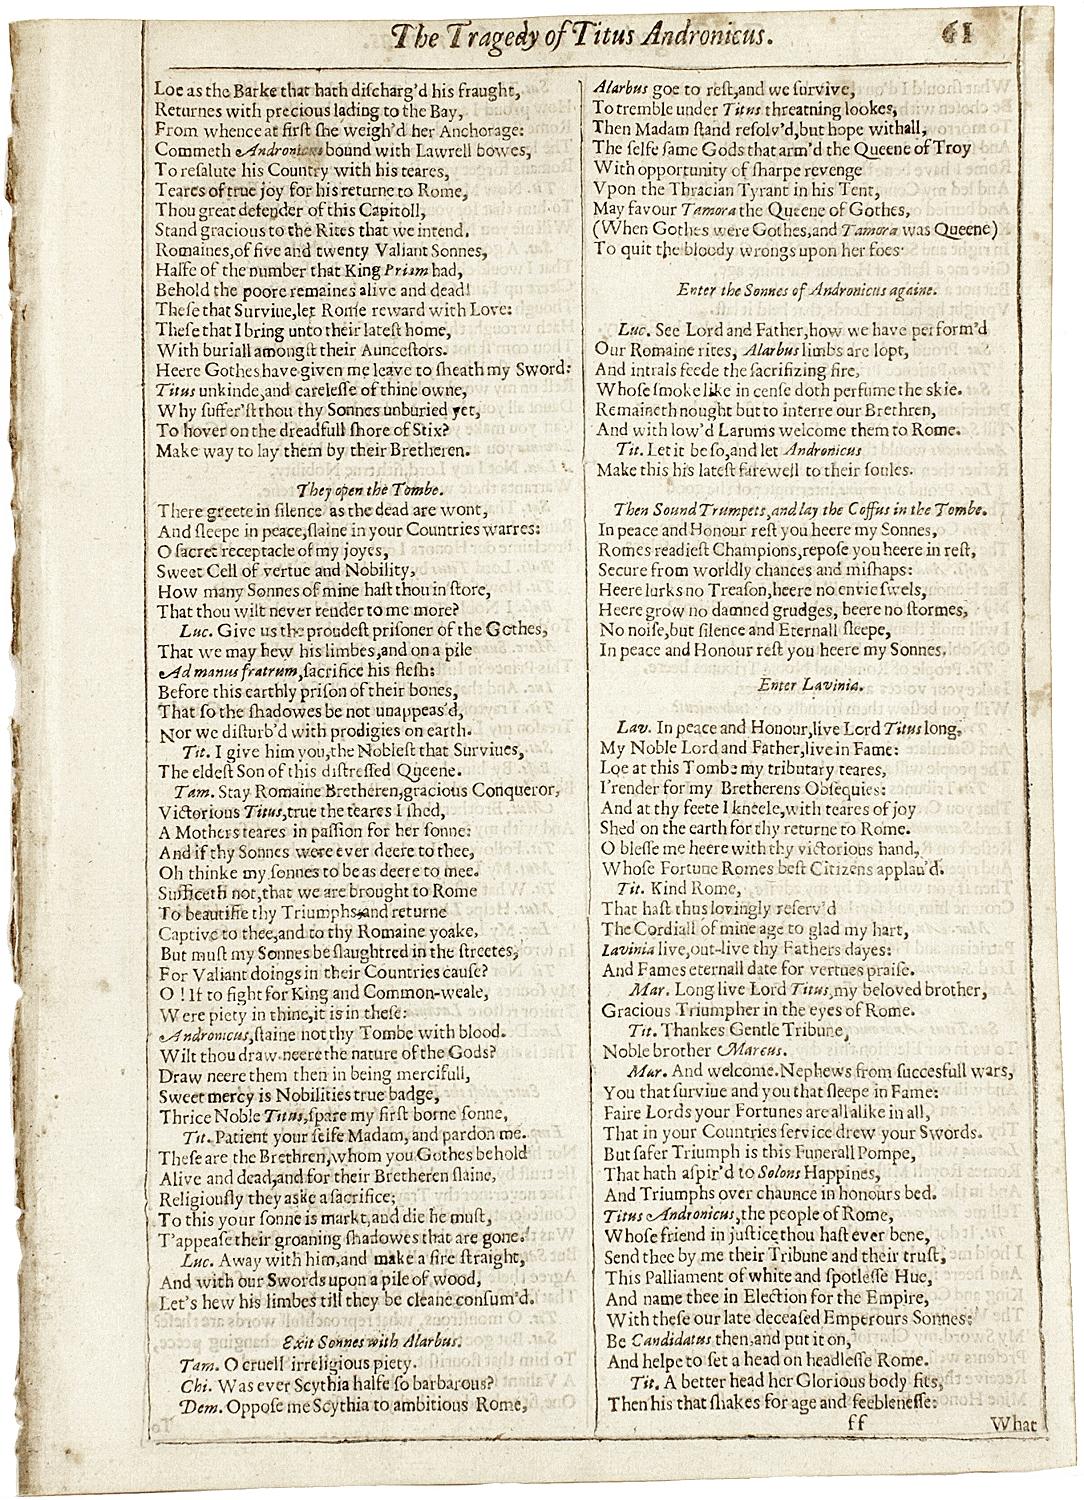 AUTHOR: SHAKESPEARE, William. 

TITLE: The Works of William Shakespeare. (The Tragedy of Titus Andronicus) - page 61-62.

PUBLISHER: London: Smethwick, J., Aspley, W., Hawkins, Richard, & Meighan, Richard, 1632.

DESCRIPTION: THE SECOND FOLIO.